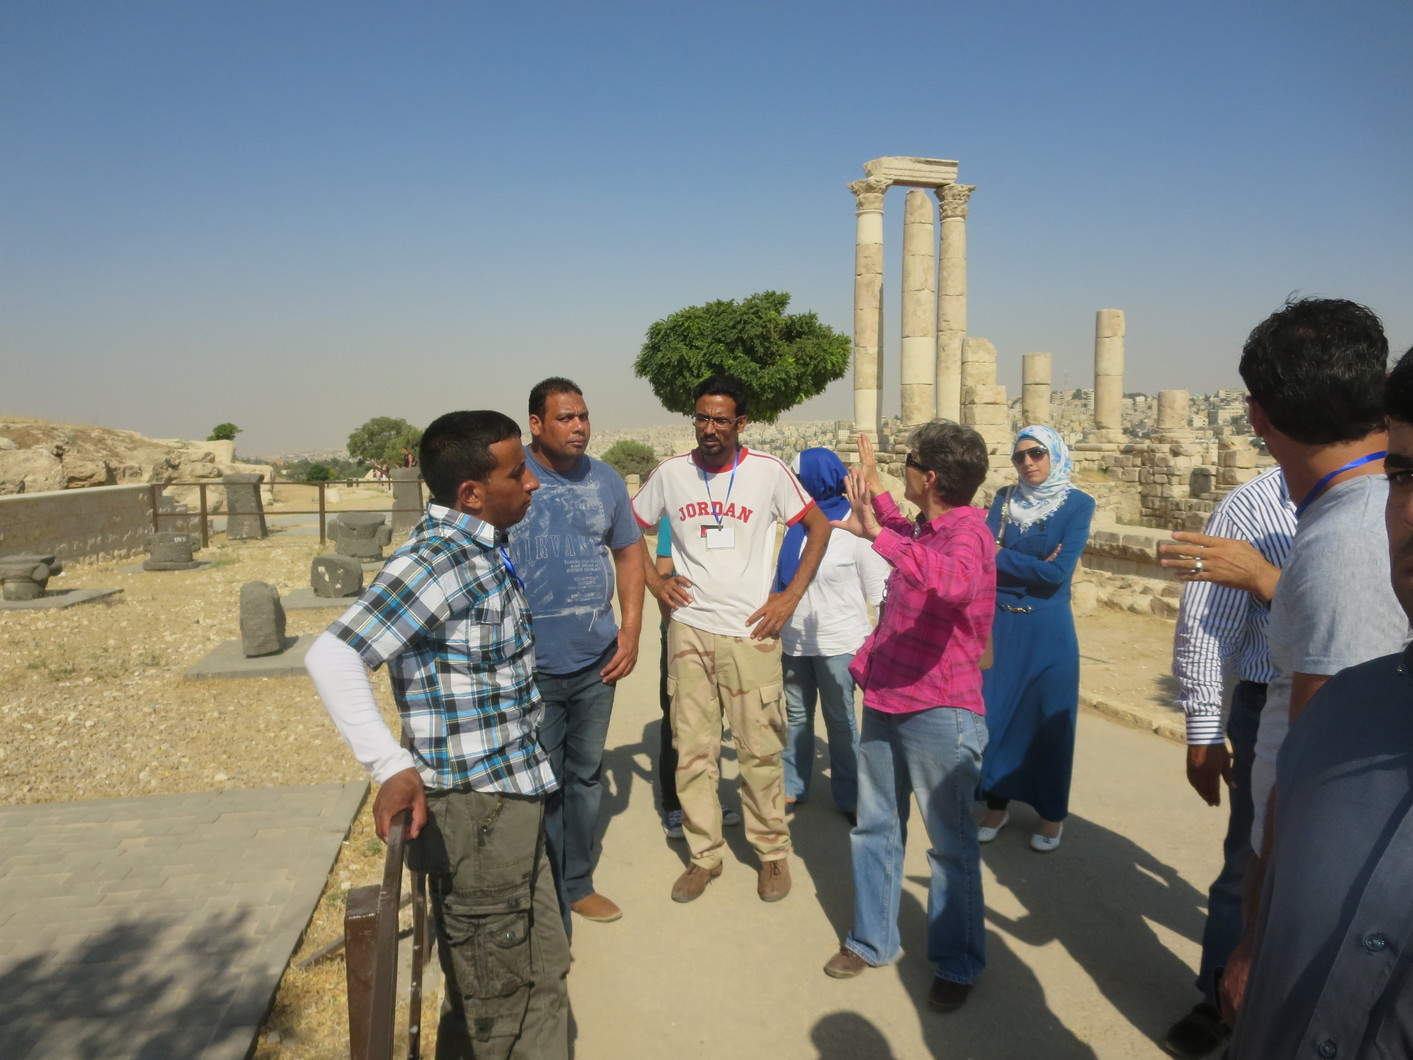 Shan Tsai (center, in pink shirt), former DOA site manager for Jabal Qala‘, leads the SCHEP site stewards on a tour of the Amman Citadel ruins. Photo by Abdelrahman al-Nasarat.